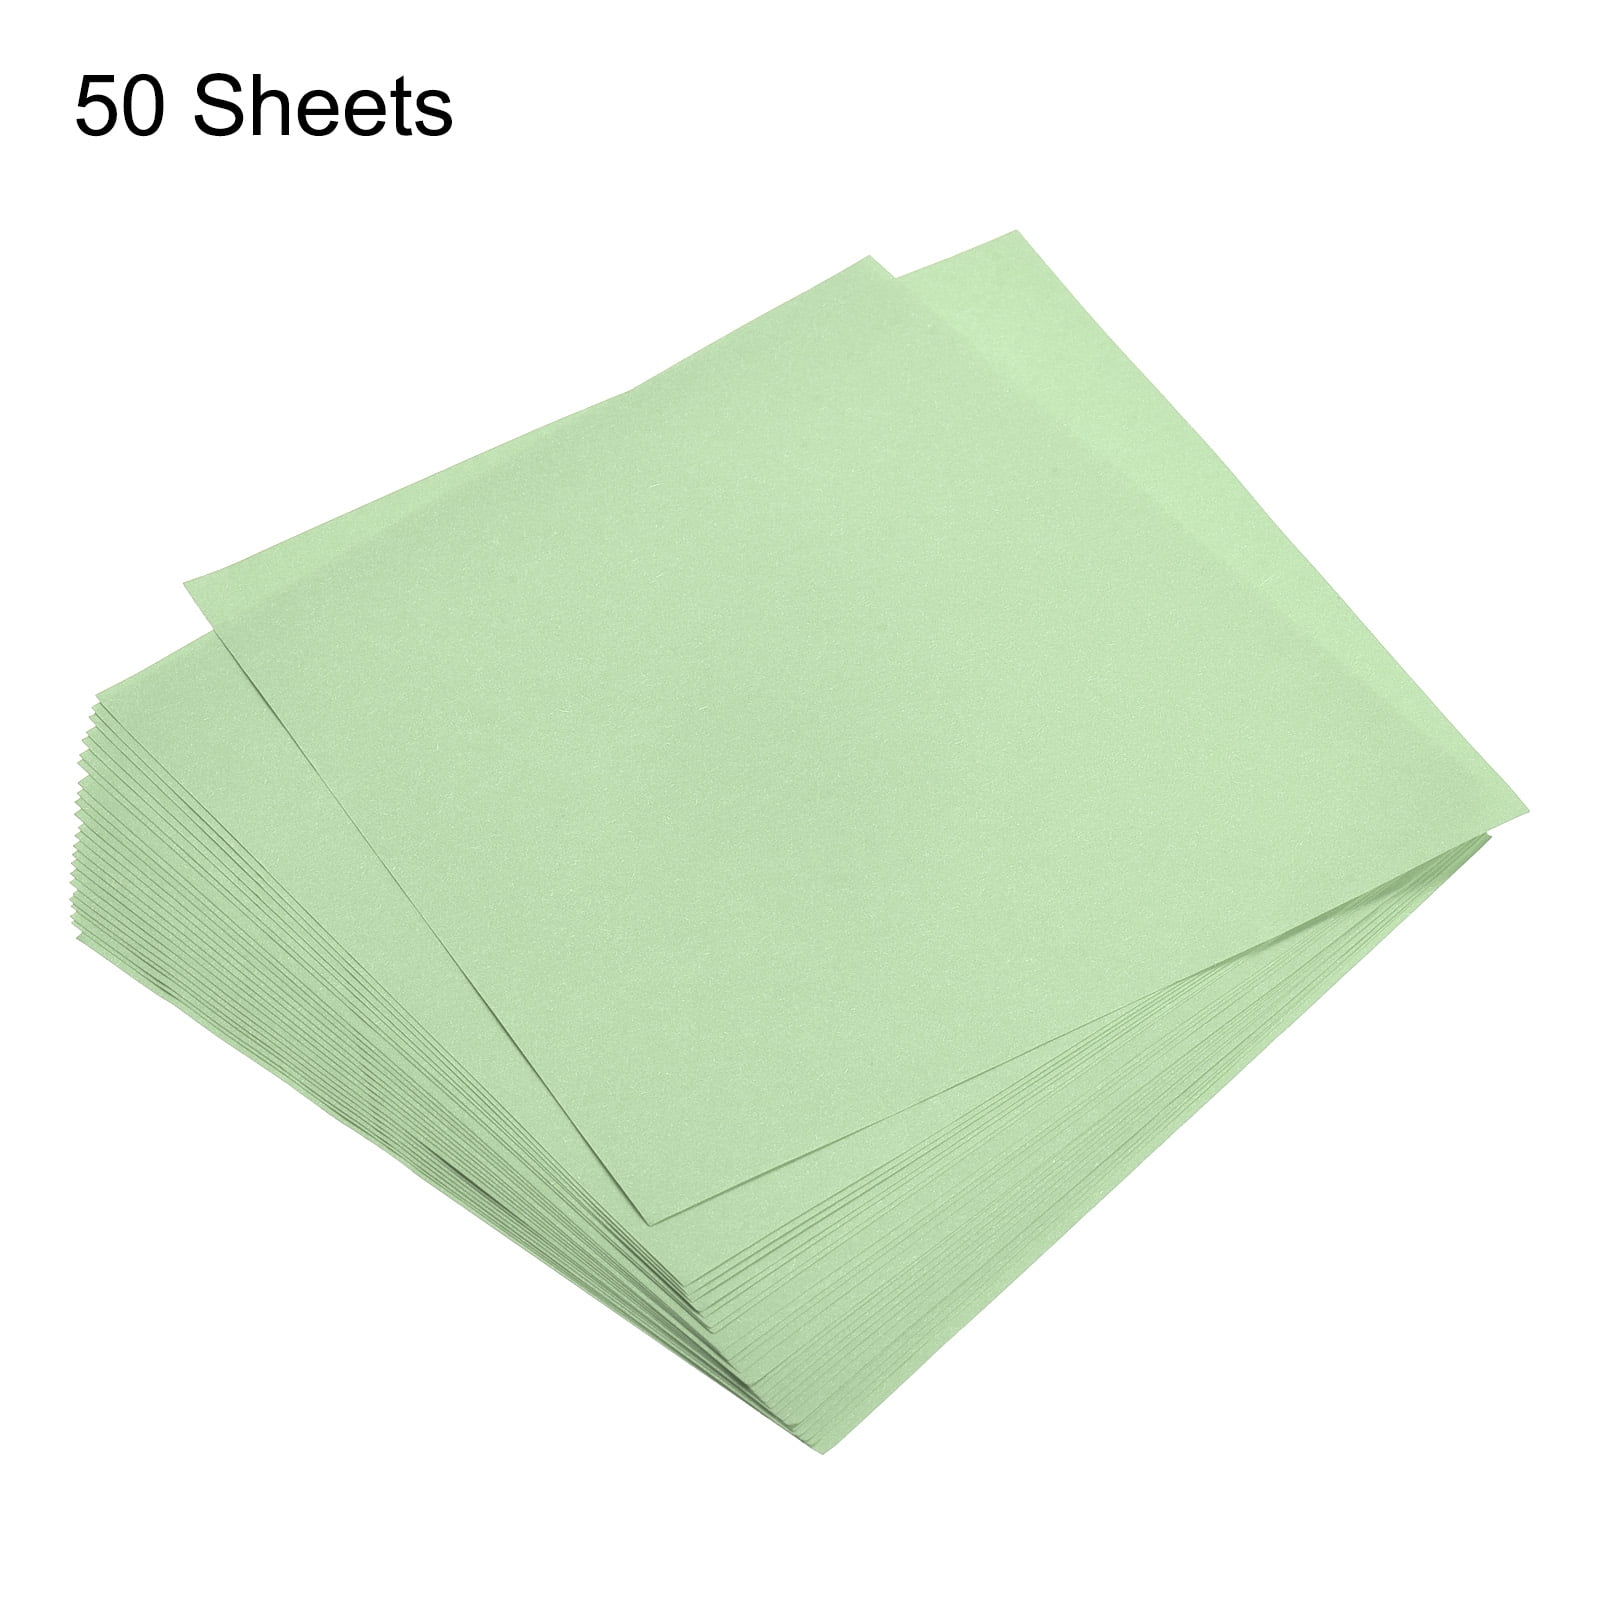 Iooleem Origami Paper, 200 Sheets, Light Green Origami Papers, 6 inch Square, Double Sided Colored Paper.